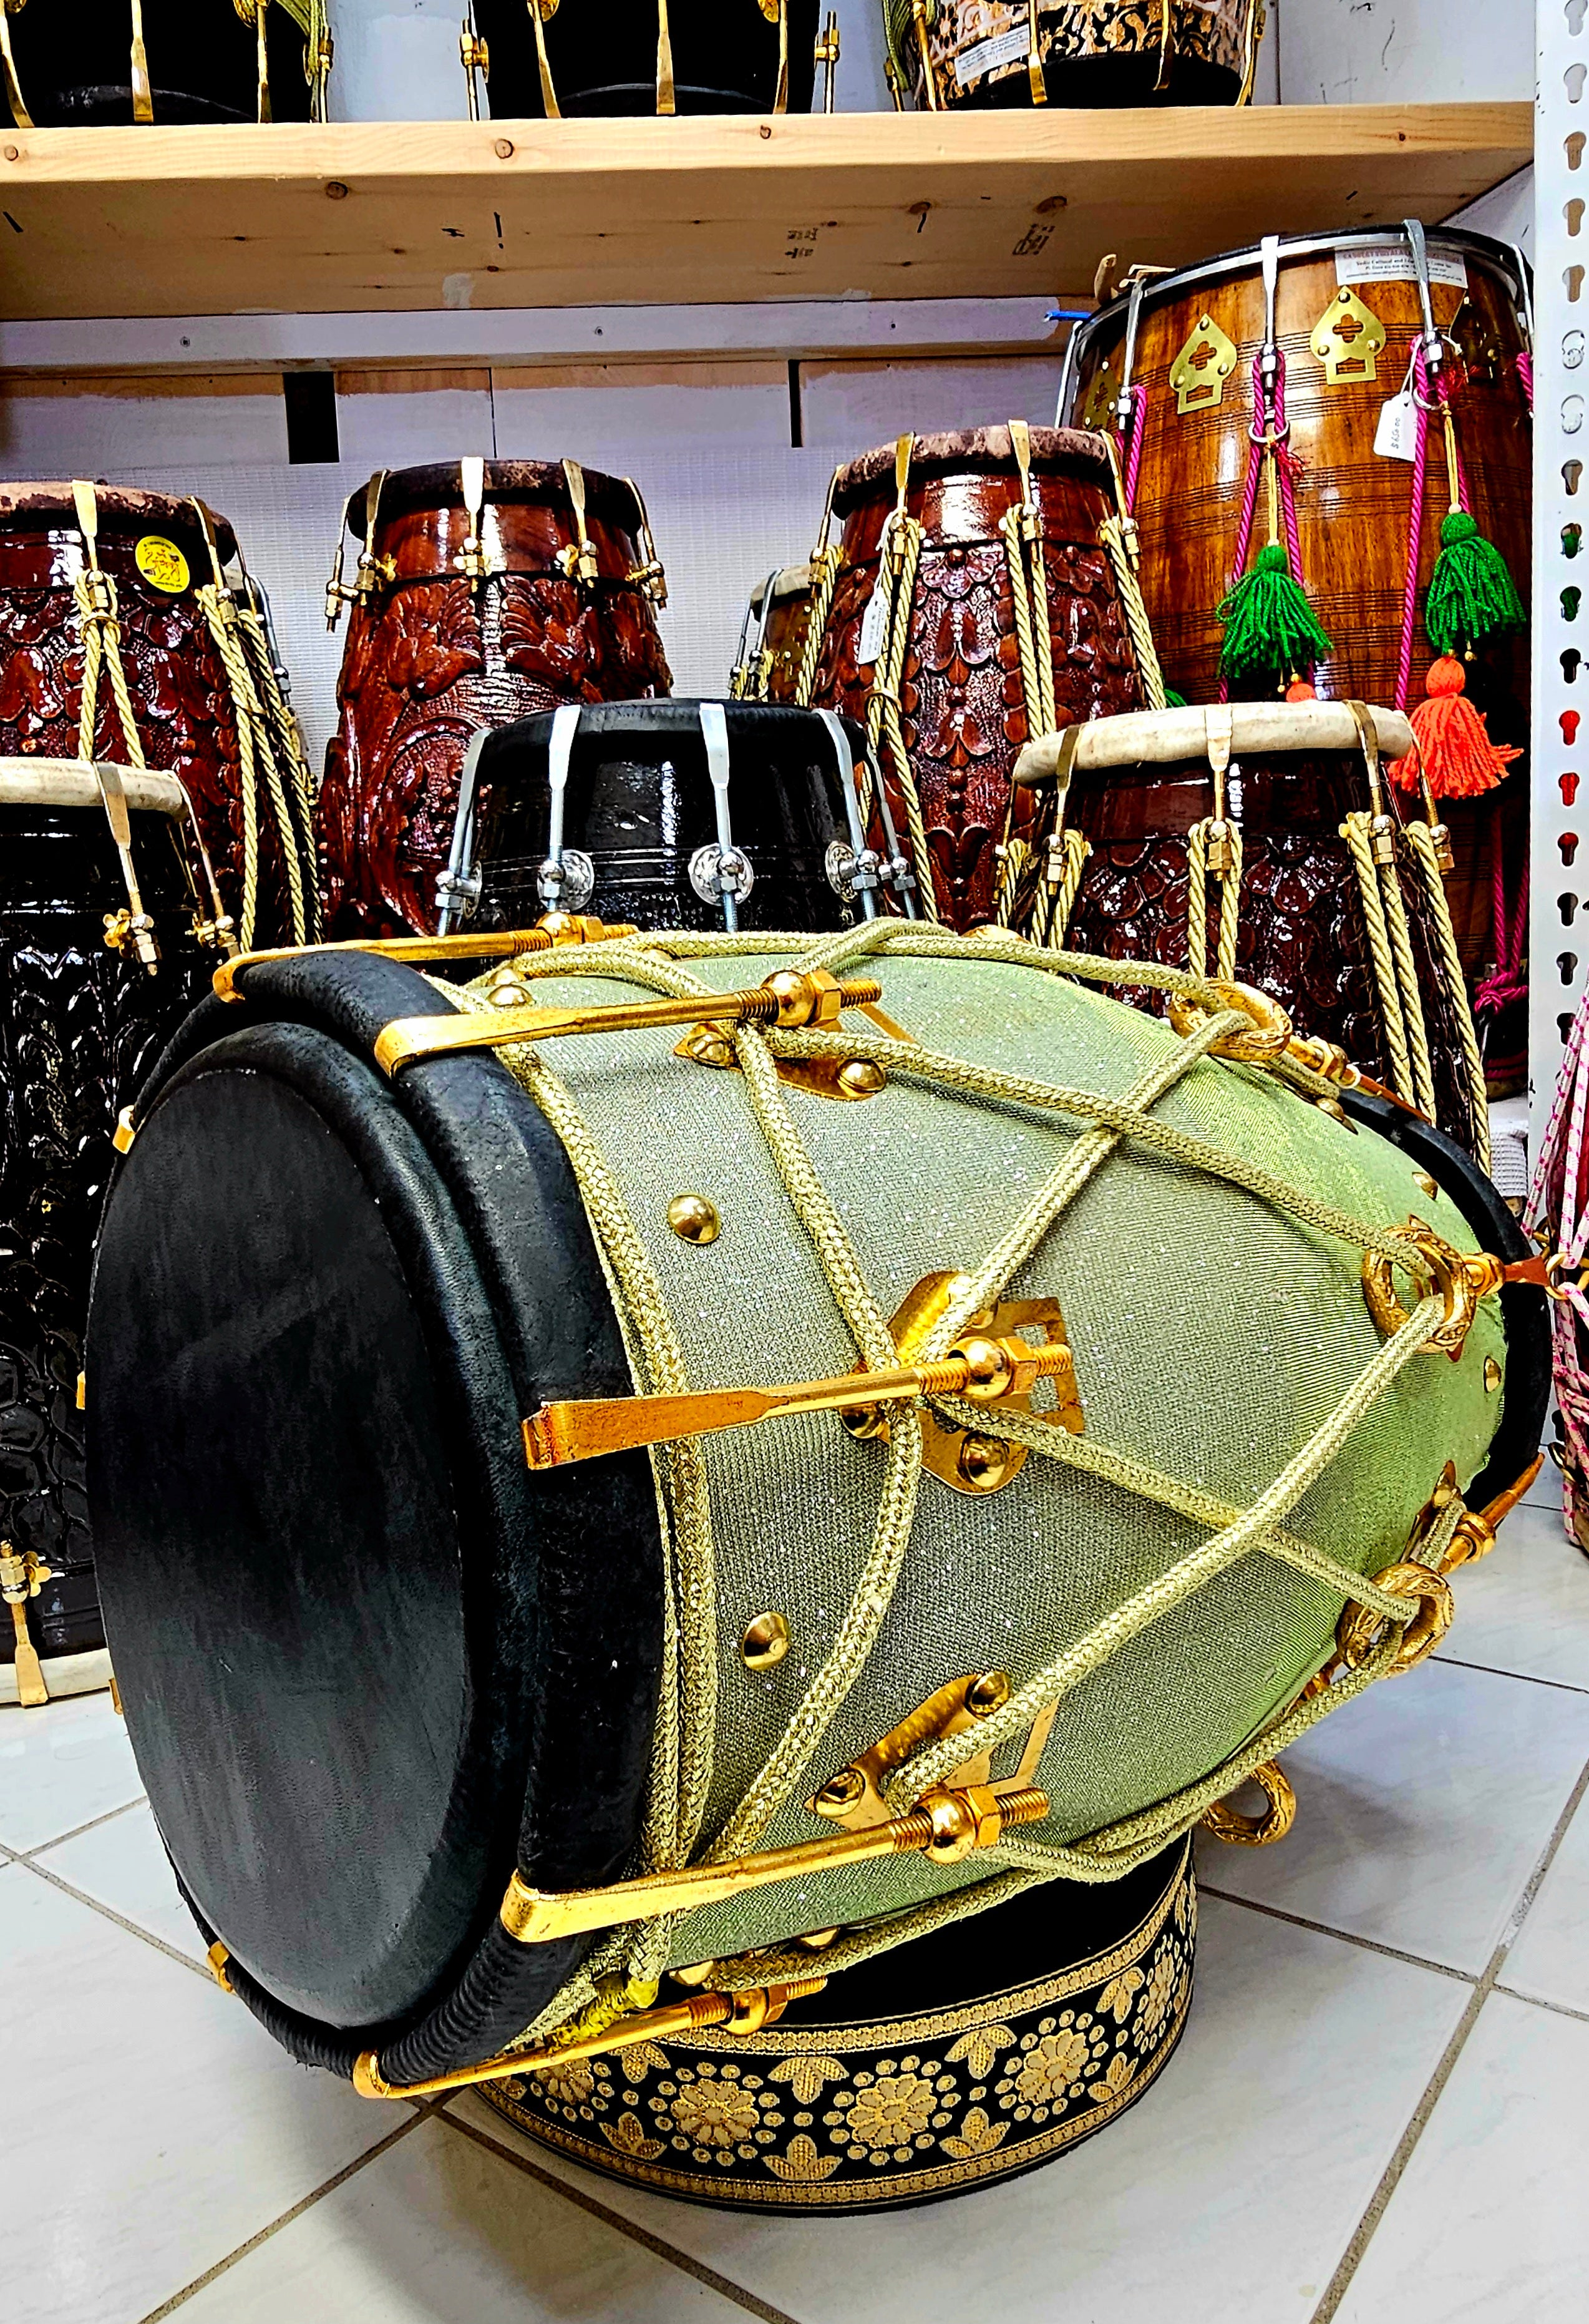 Radiant Rhythms: Sparkly Sherwani Wrapped Red Sheesham Dholak with Golden Brass Bolts and Black Pudis (Minor Fabric Rip Defects) (BLACK FRIDAY SALE!)